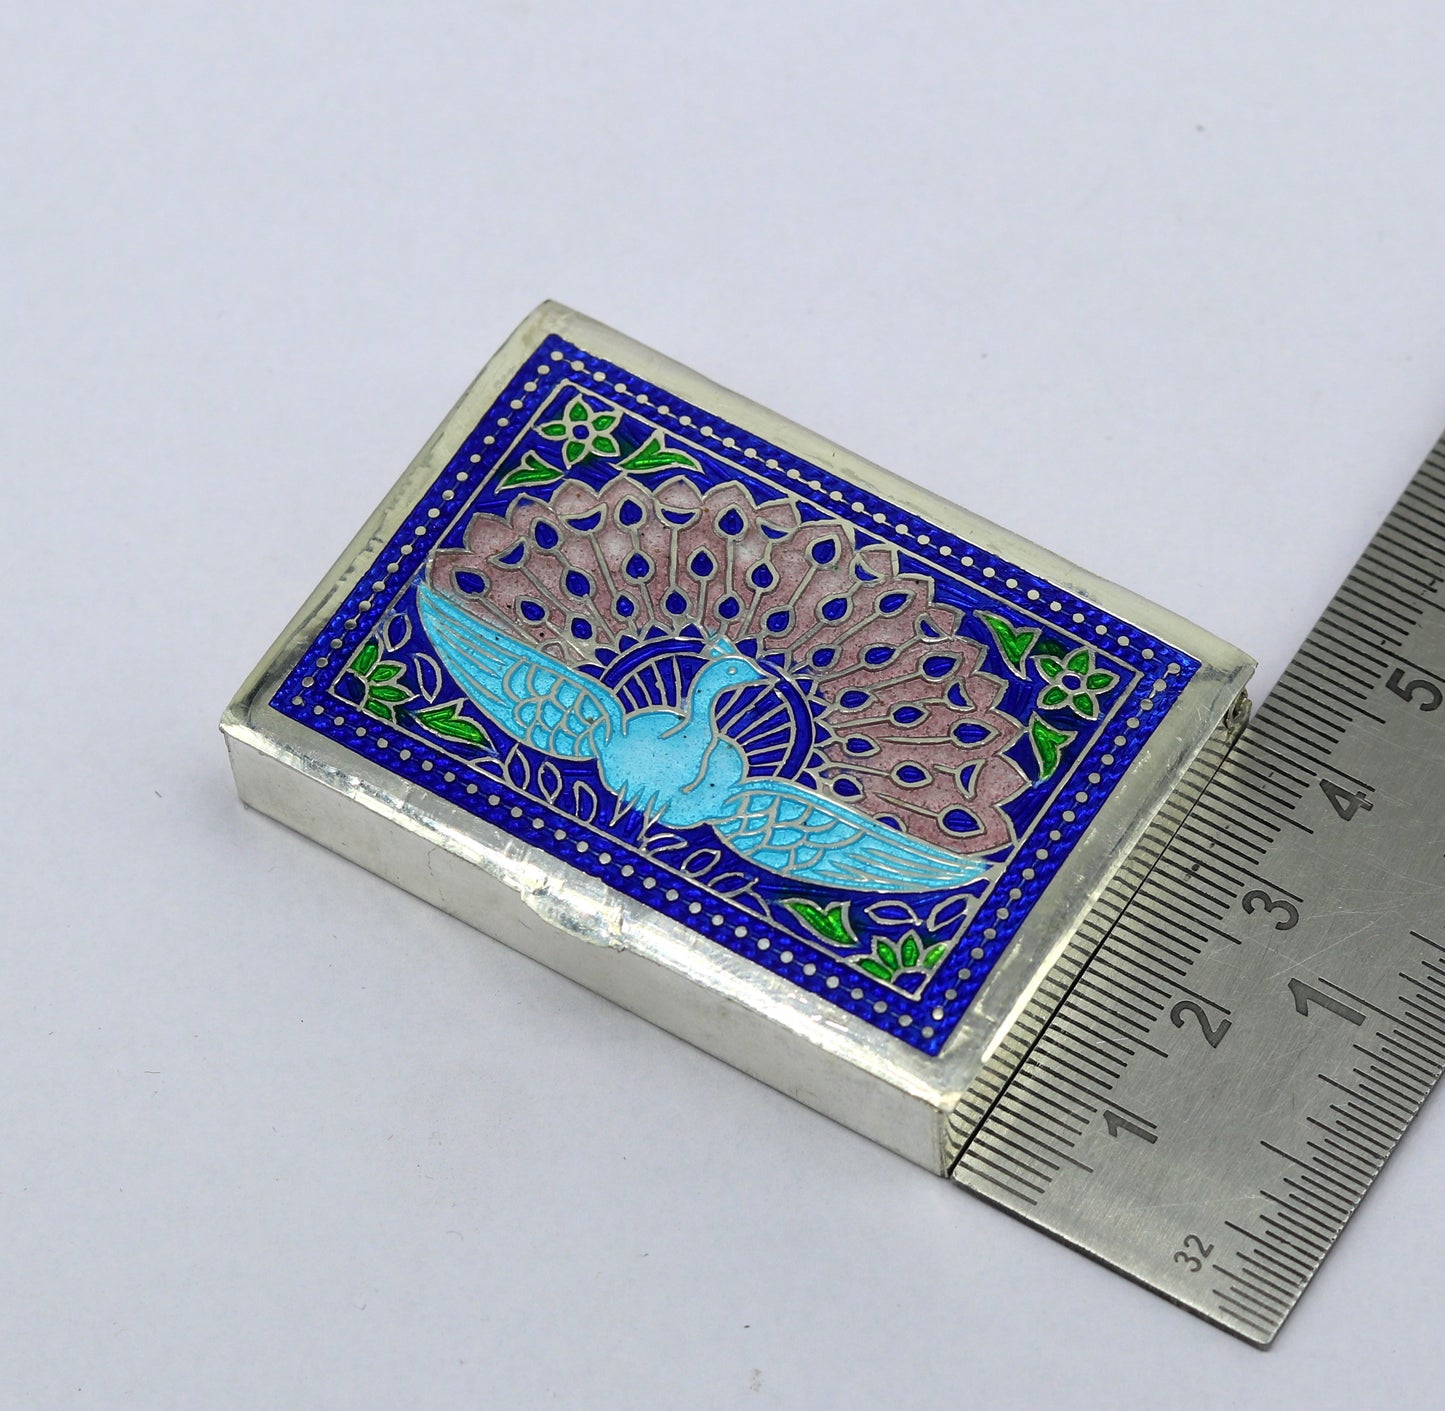 925 sterling silver customized peacock enamel trinket box, casket container box, pills box, silver article, silver jewelry box stb28 - TRIBAL ORNAMENTS